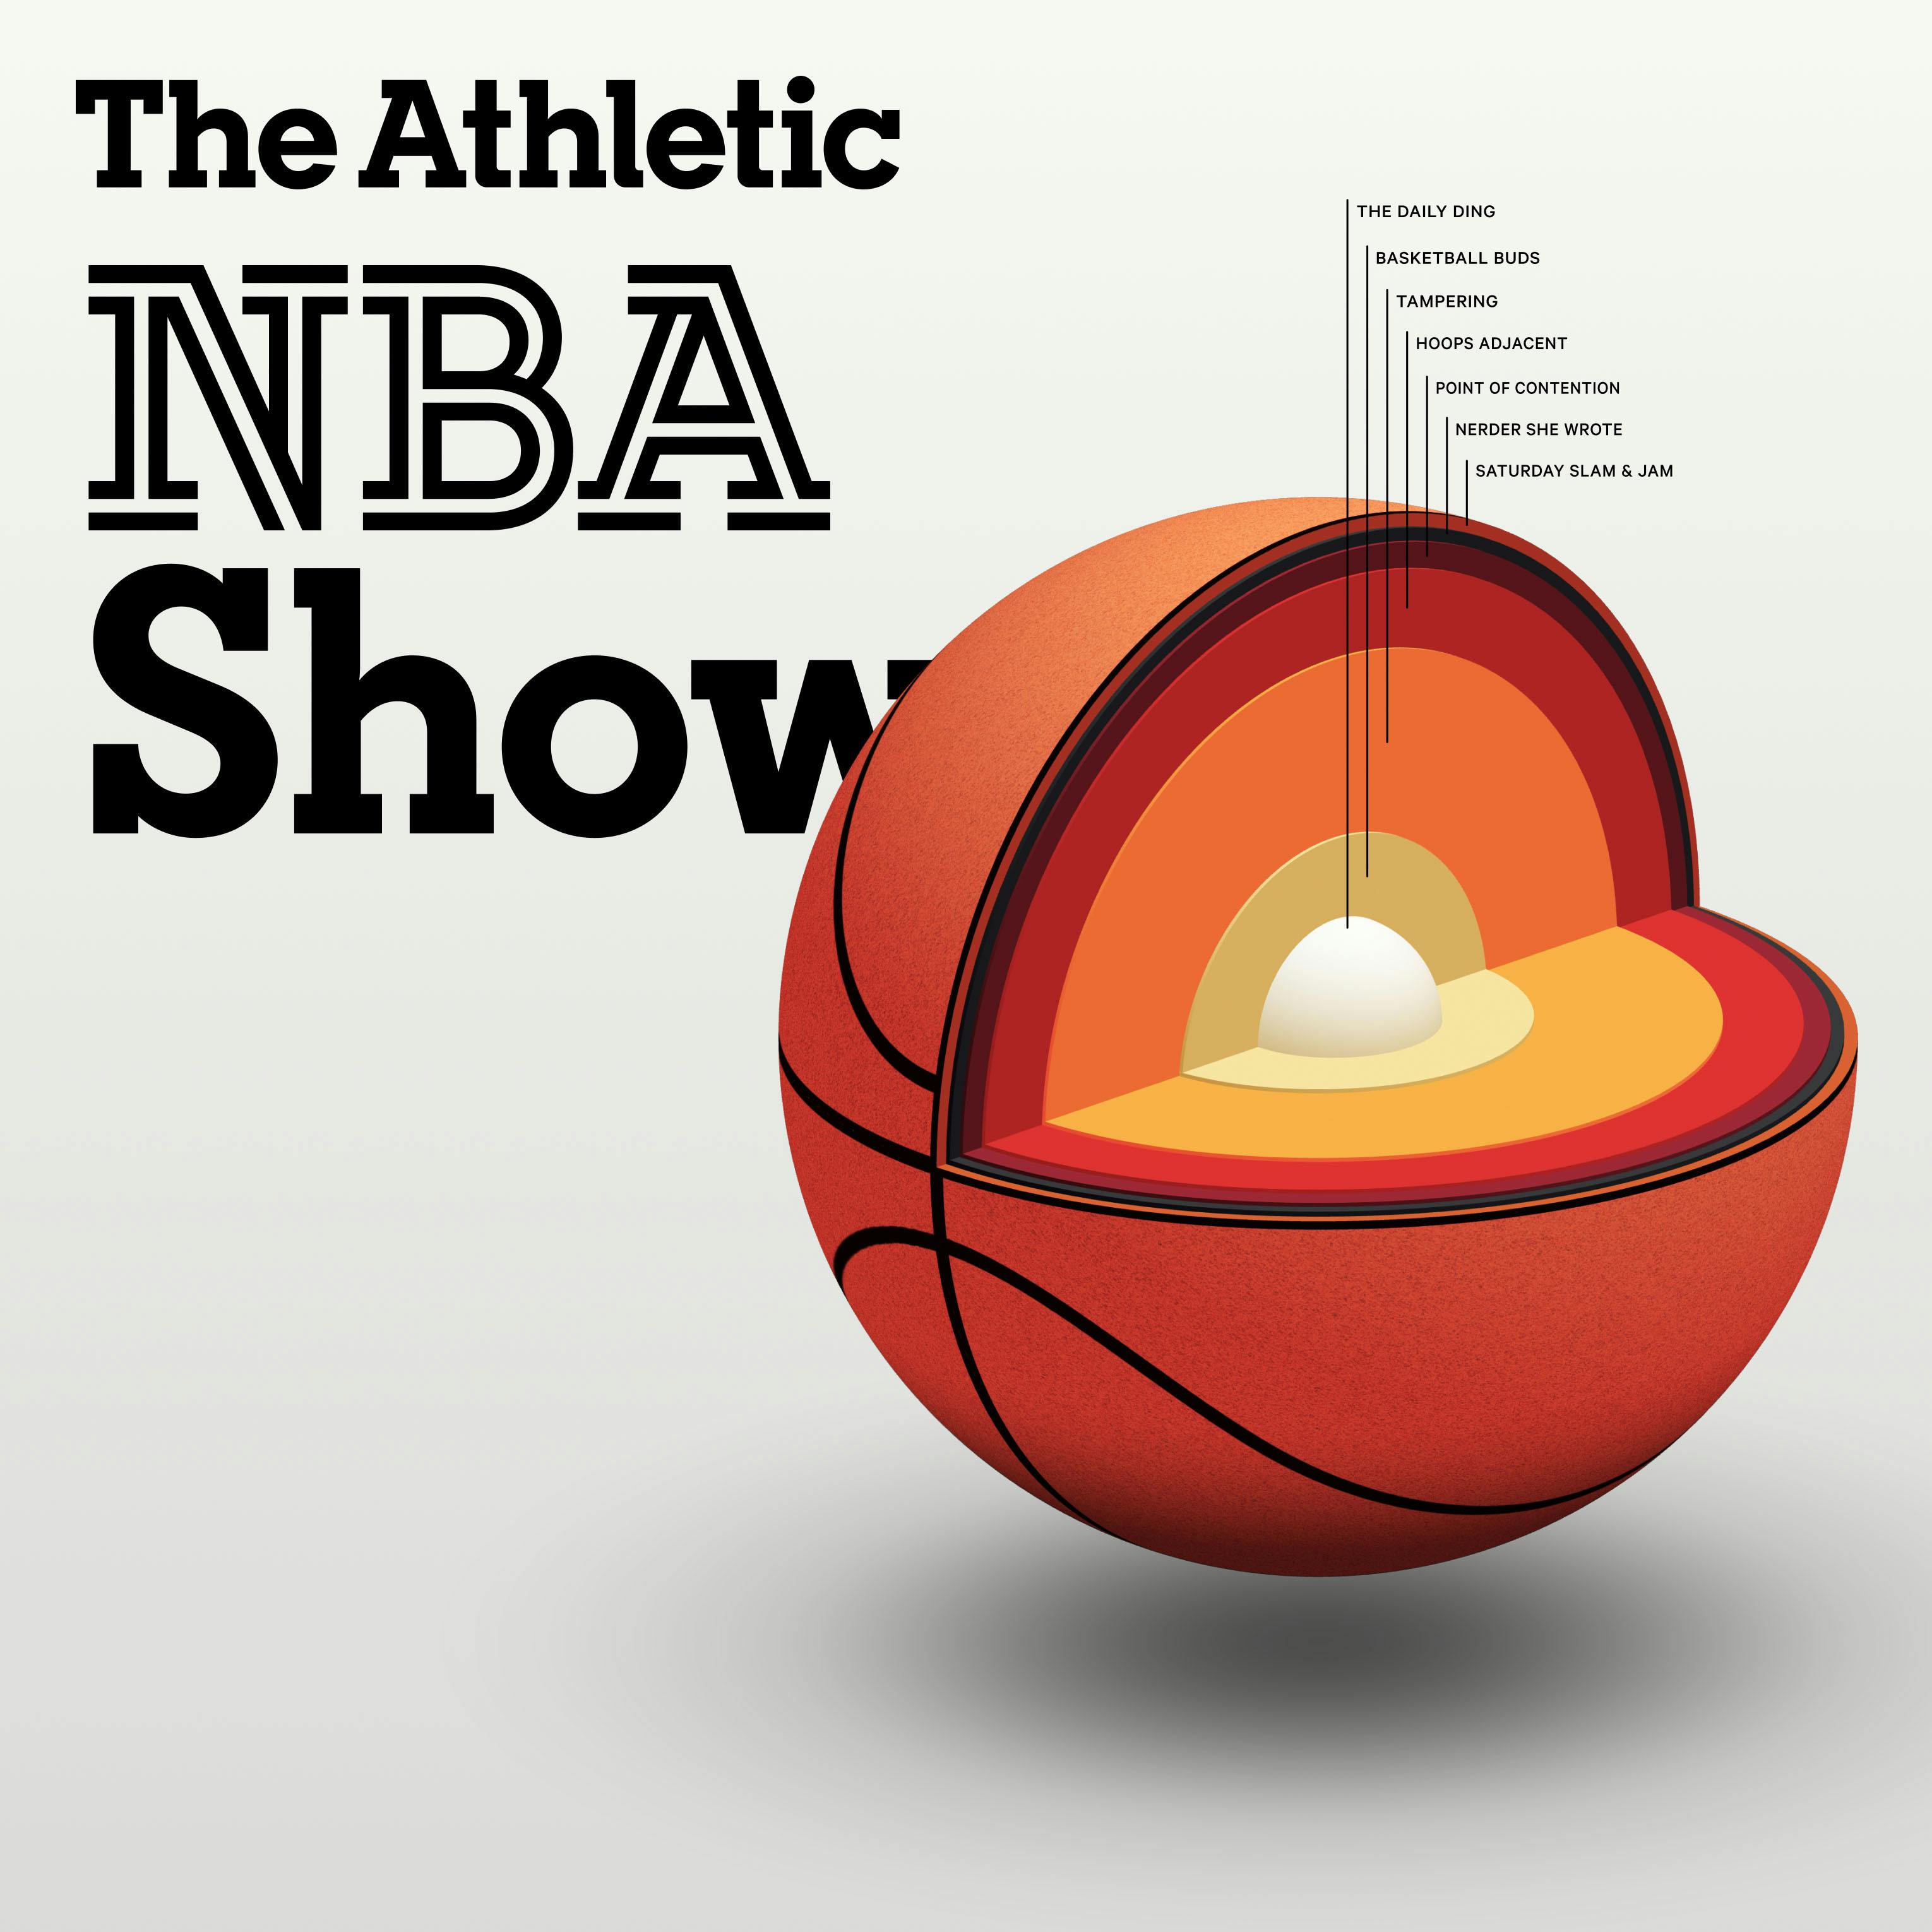 The Athletic NBA Show - Podcasts - The Athletic